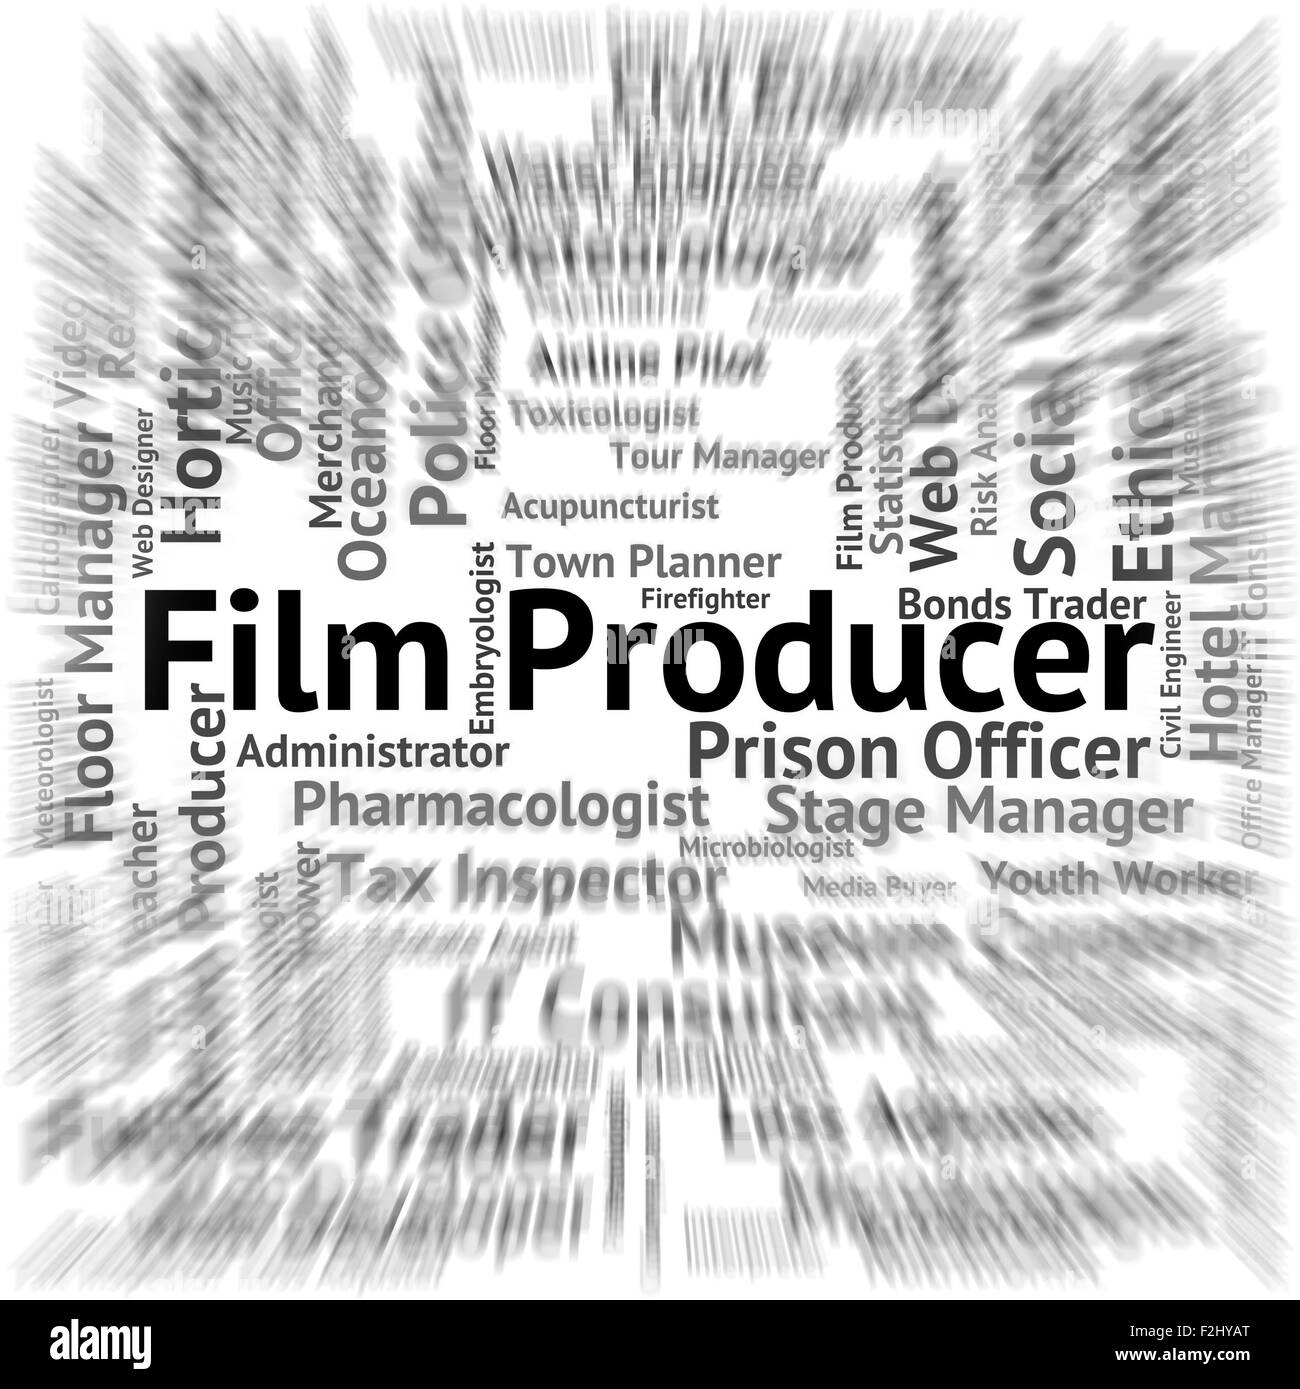 Film Producer Meaning Jobs Recruitment And Hire Stock Photo - Alamy